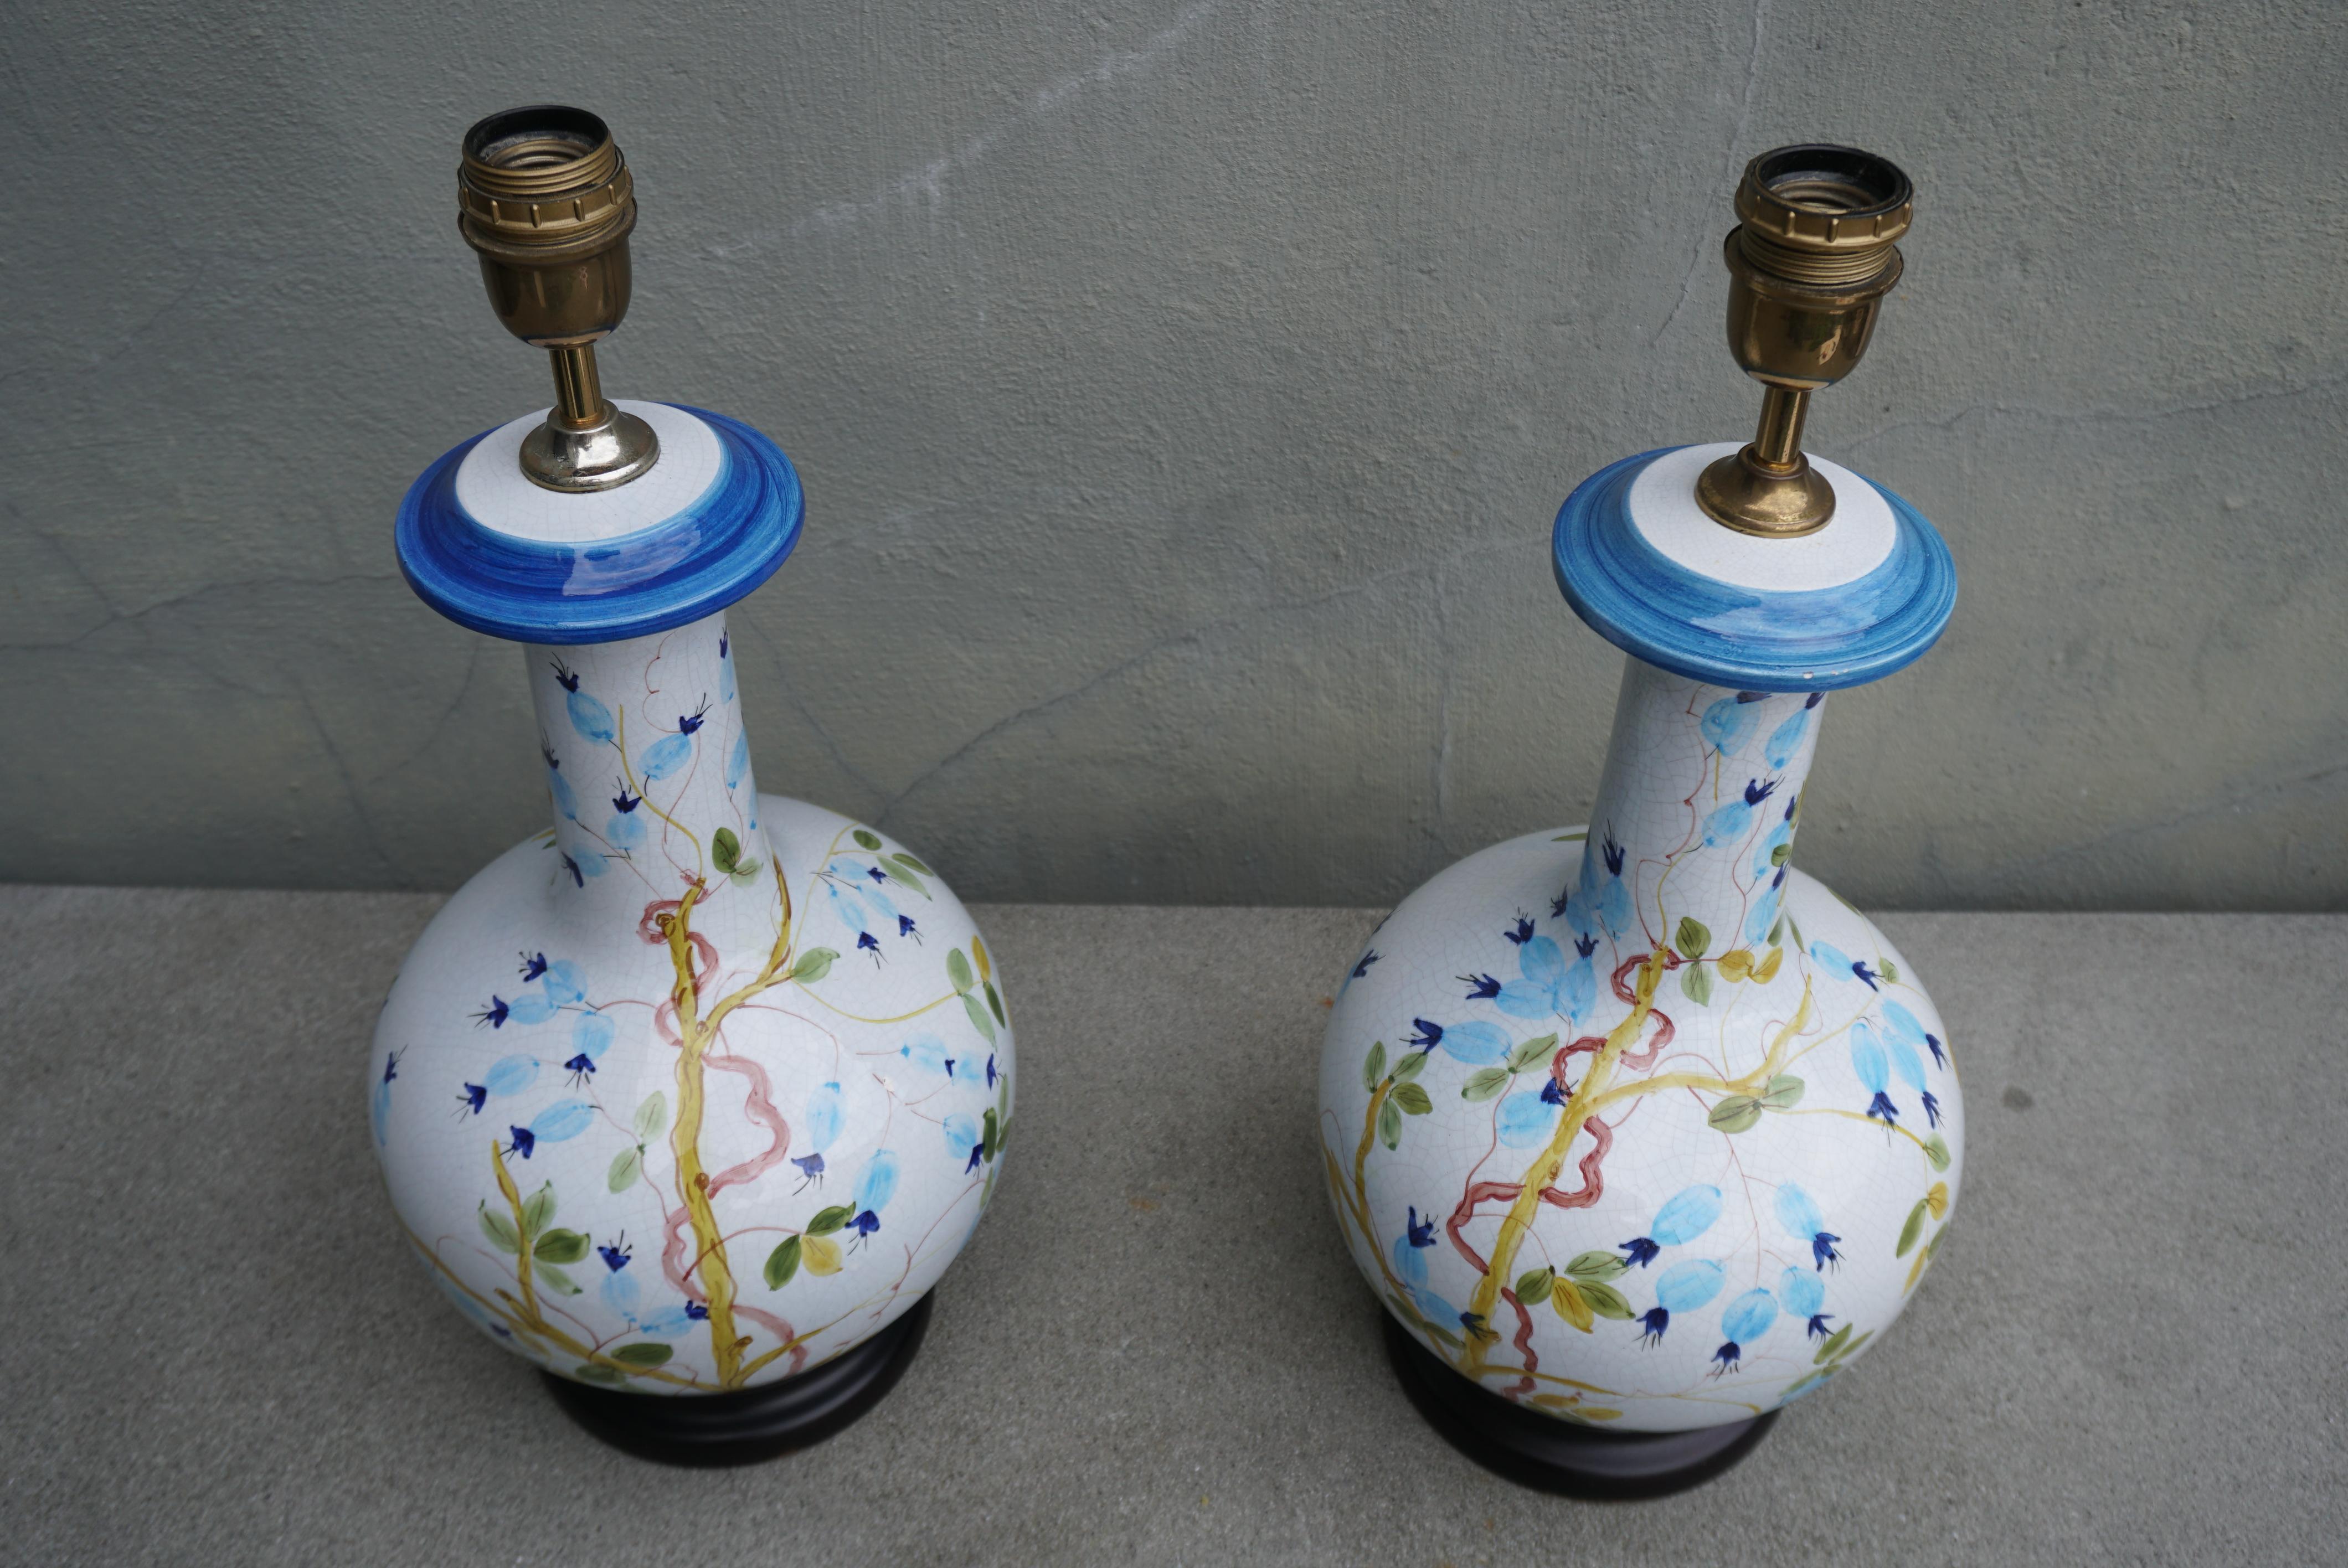 Hollywood Regency 1960s Blue and White Floral Ceramic Table Lamps, Pair For Sale